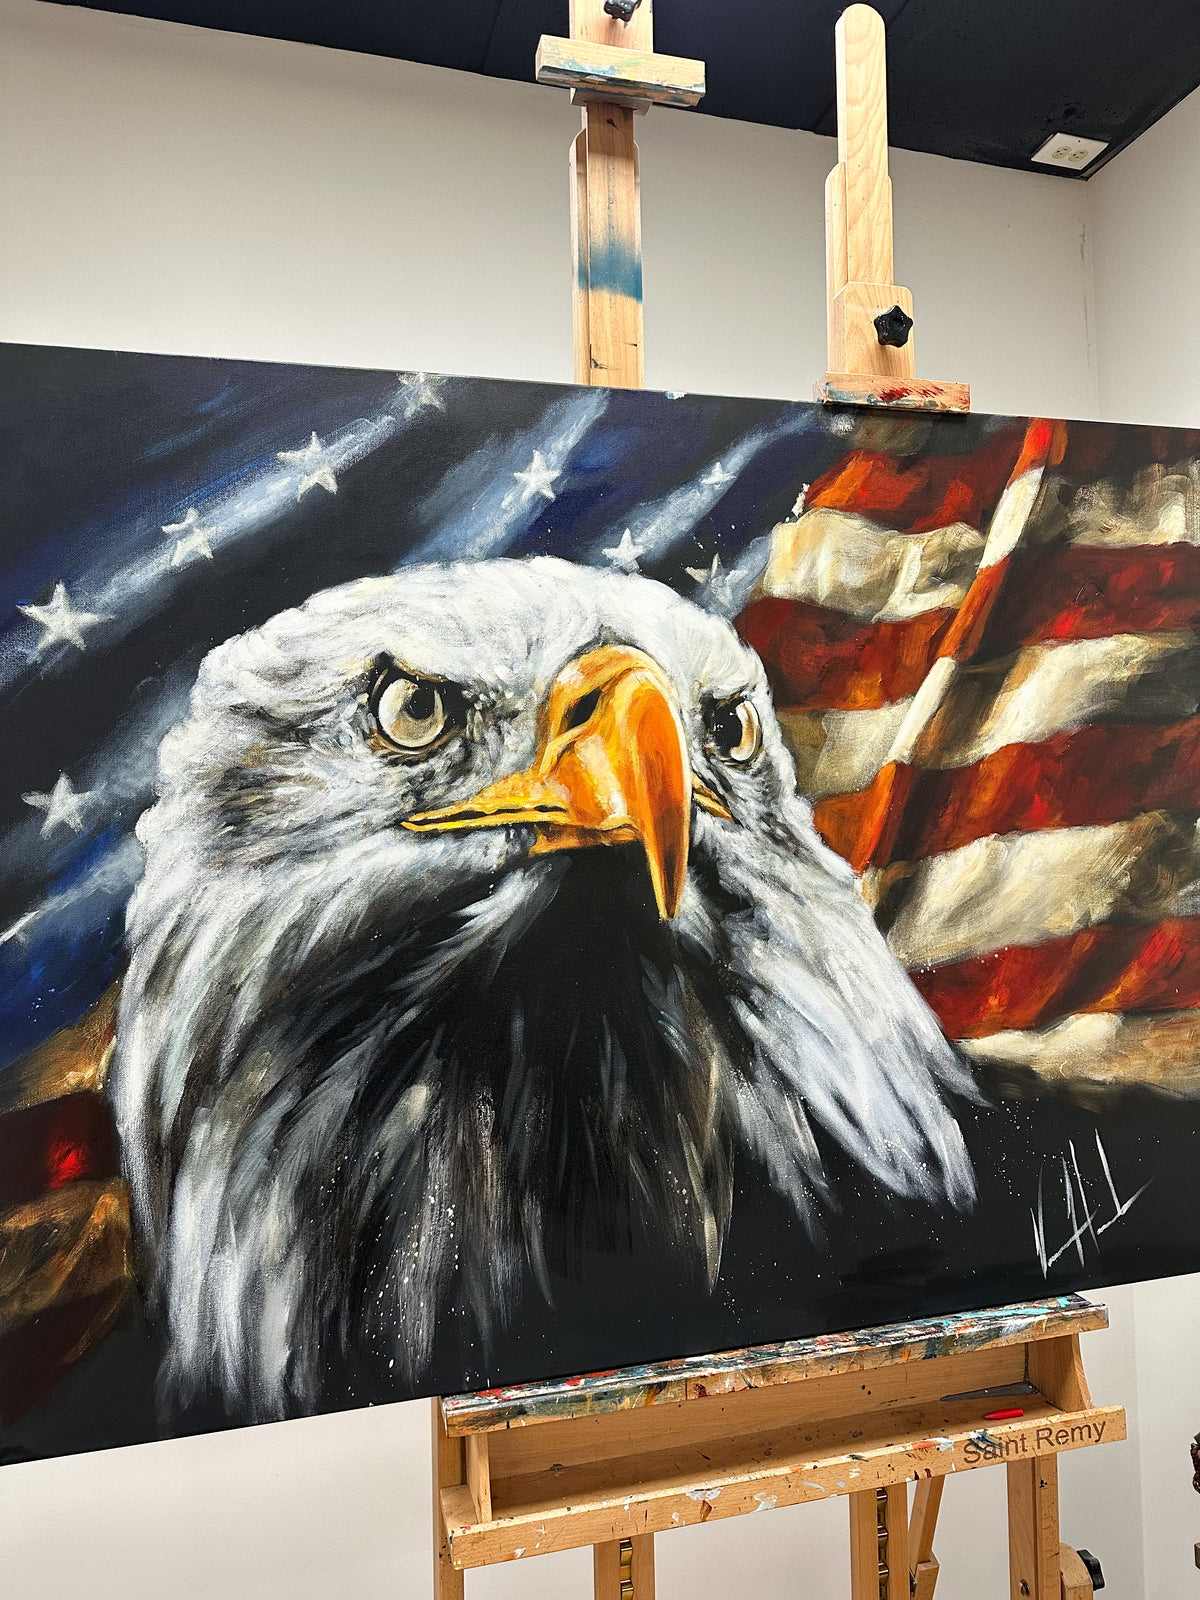 The Fight for Freedom - 36”x48” Original Acrylic Painting